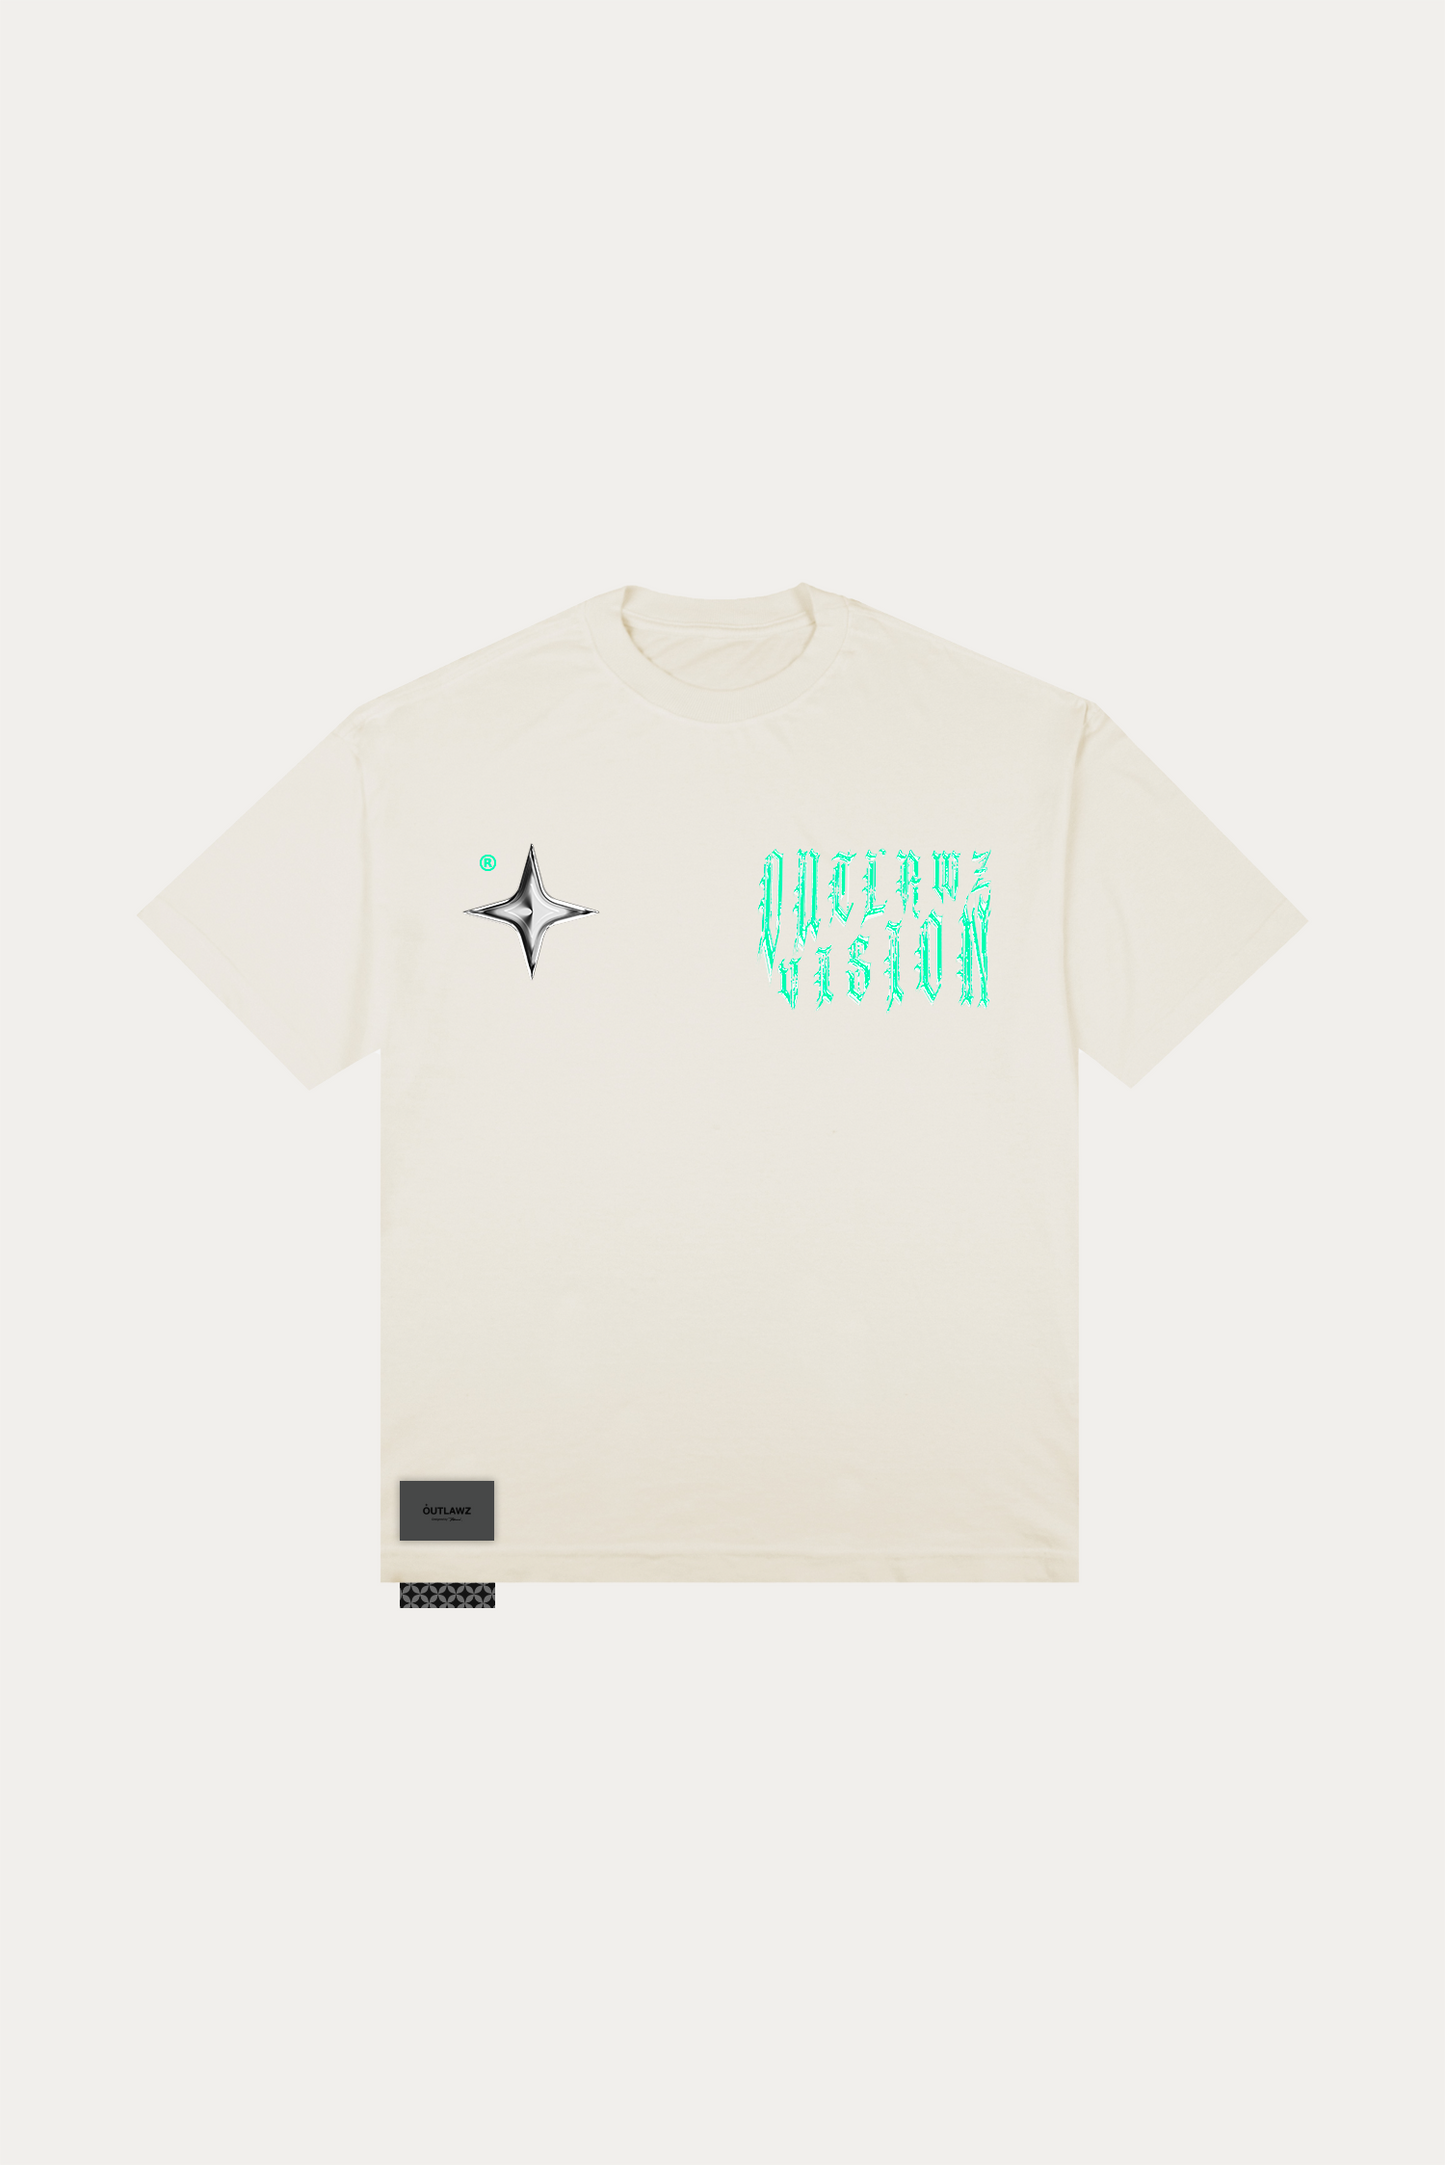 T-Shirt Over Boxy "A HEAD OF US" - Off-white